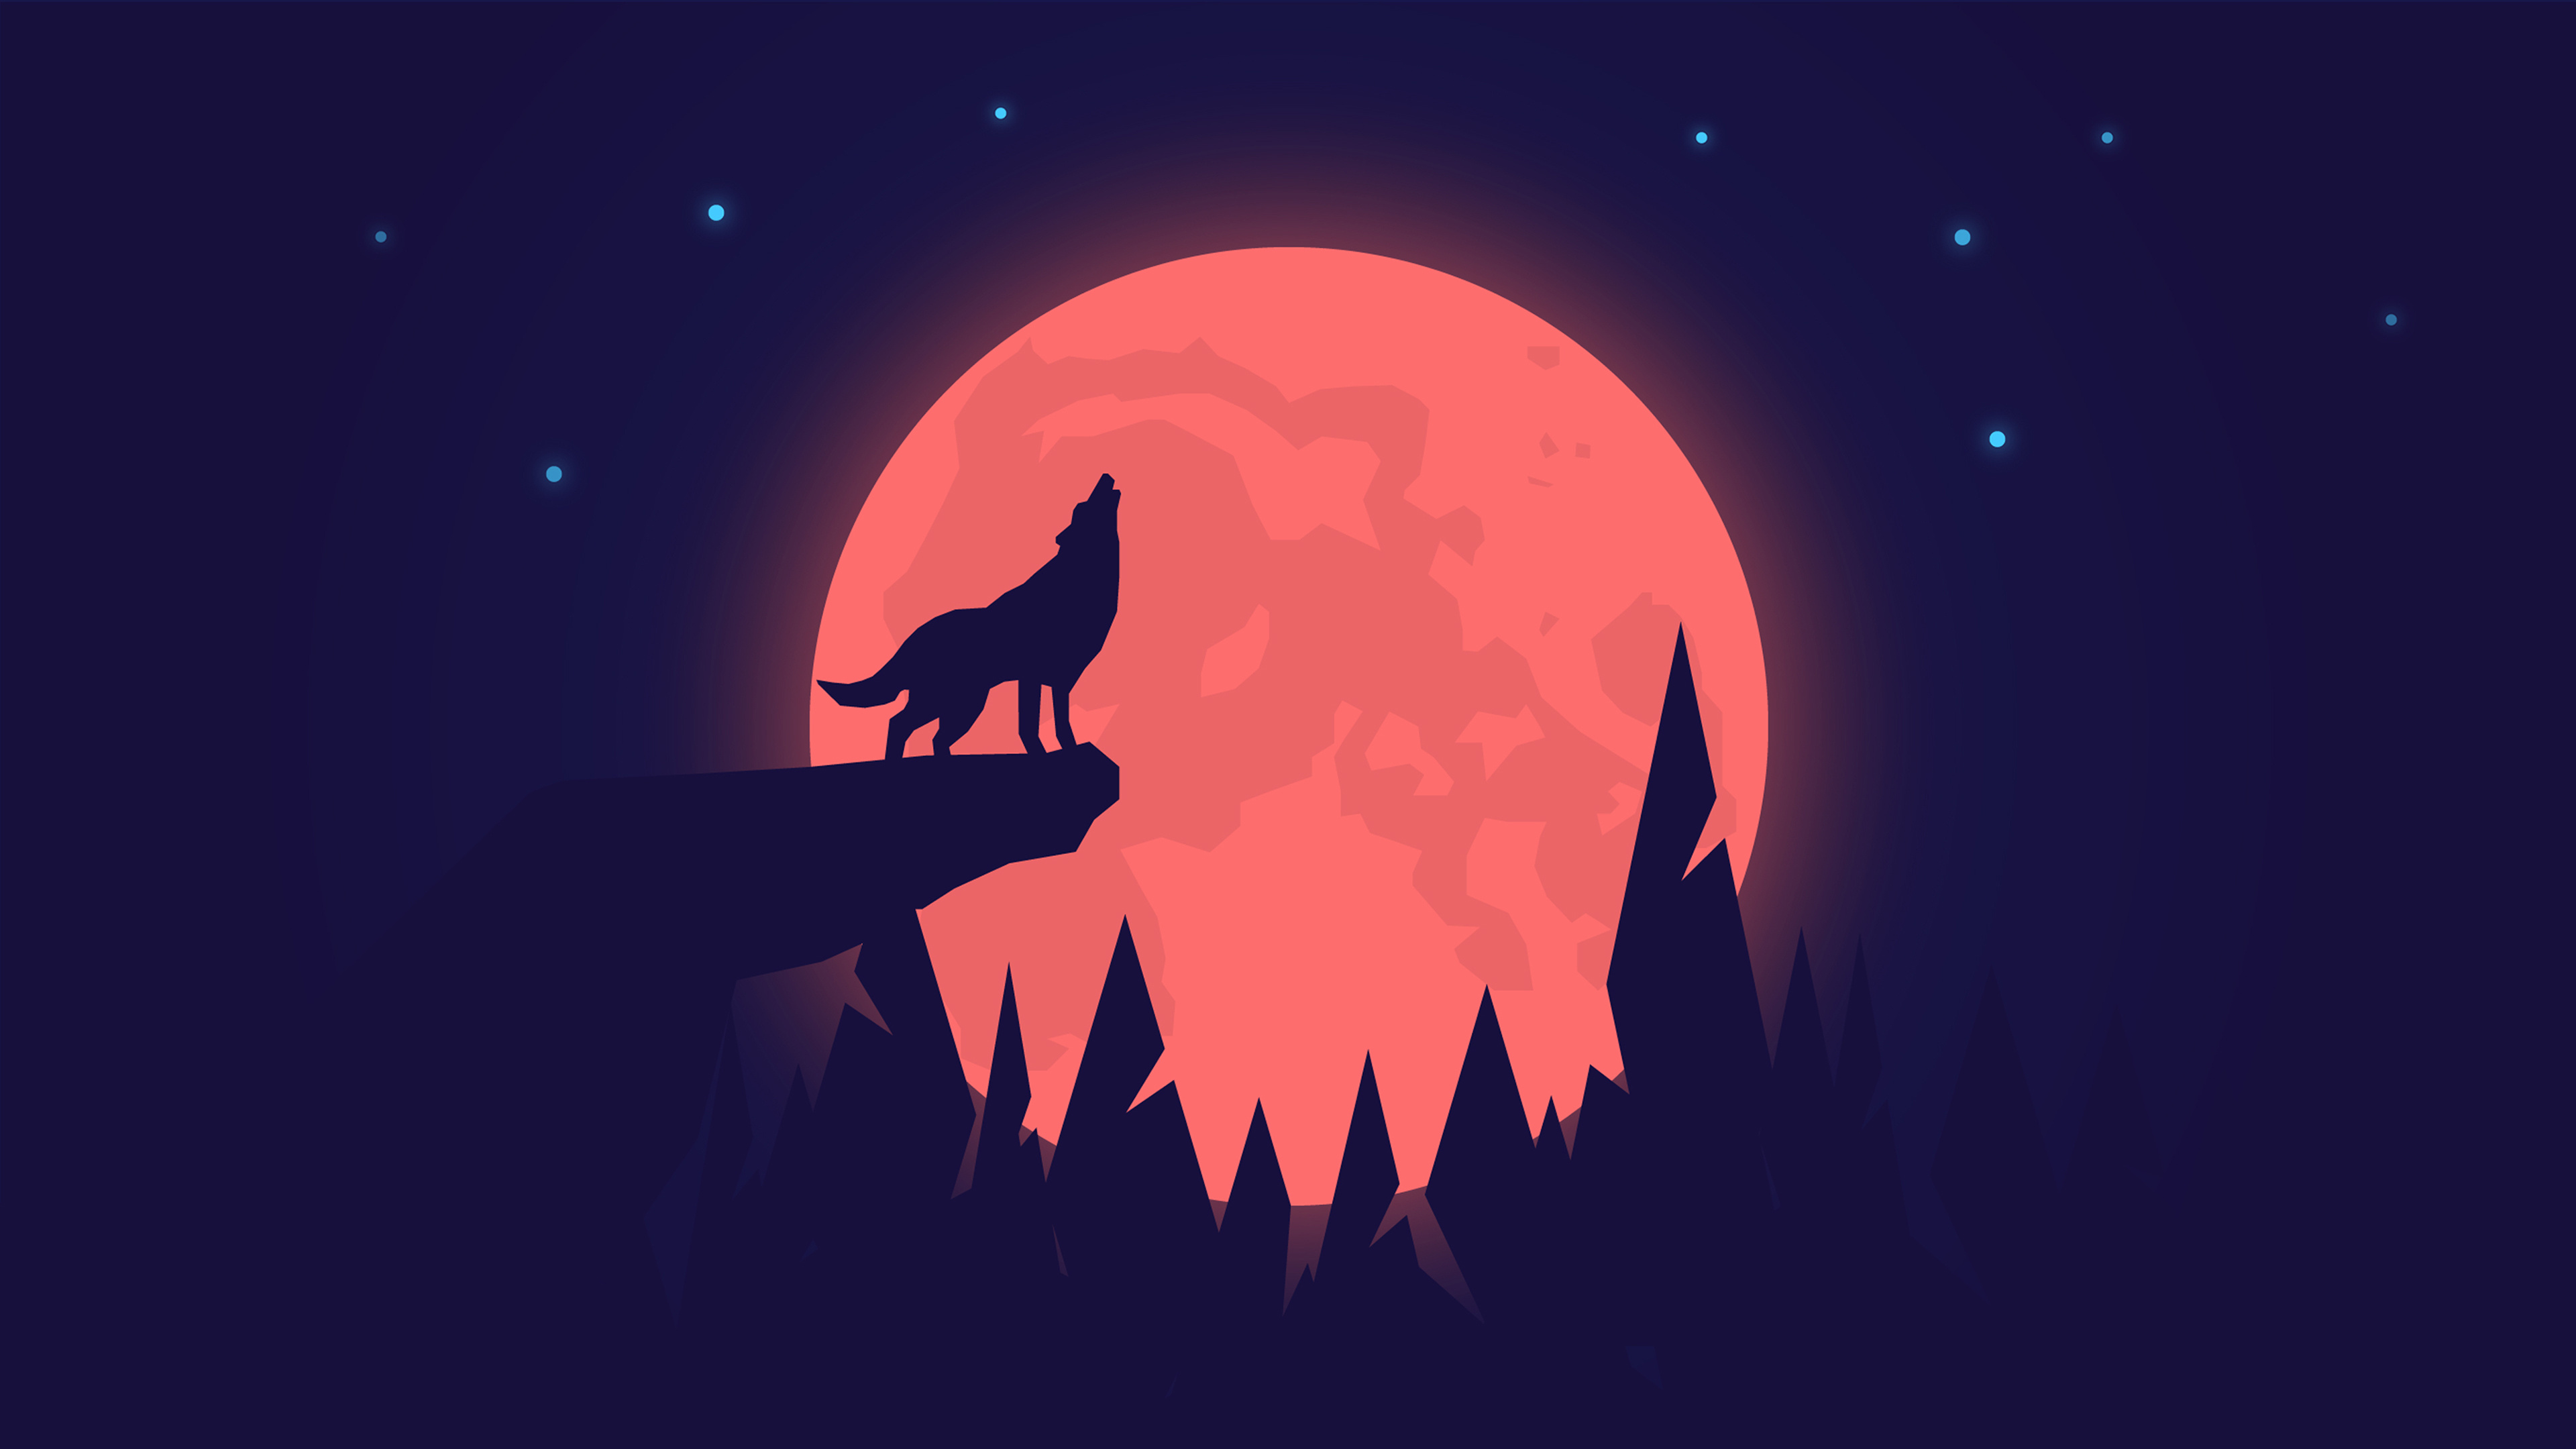 Wolf howling at moon, Mysterious silhouette, Nocturnal wildlife, Nighttime serenade, 3840x2160 4K Desktop